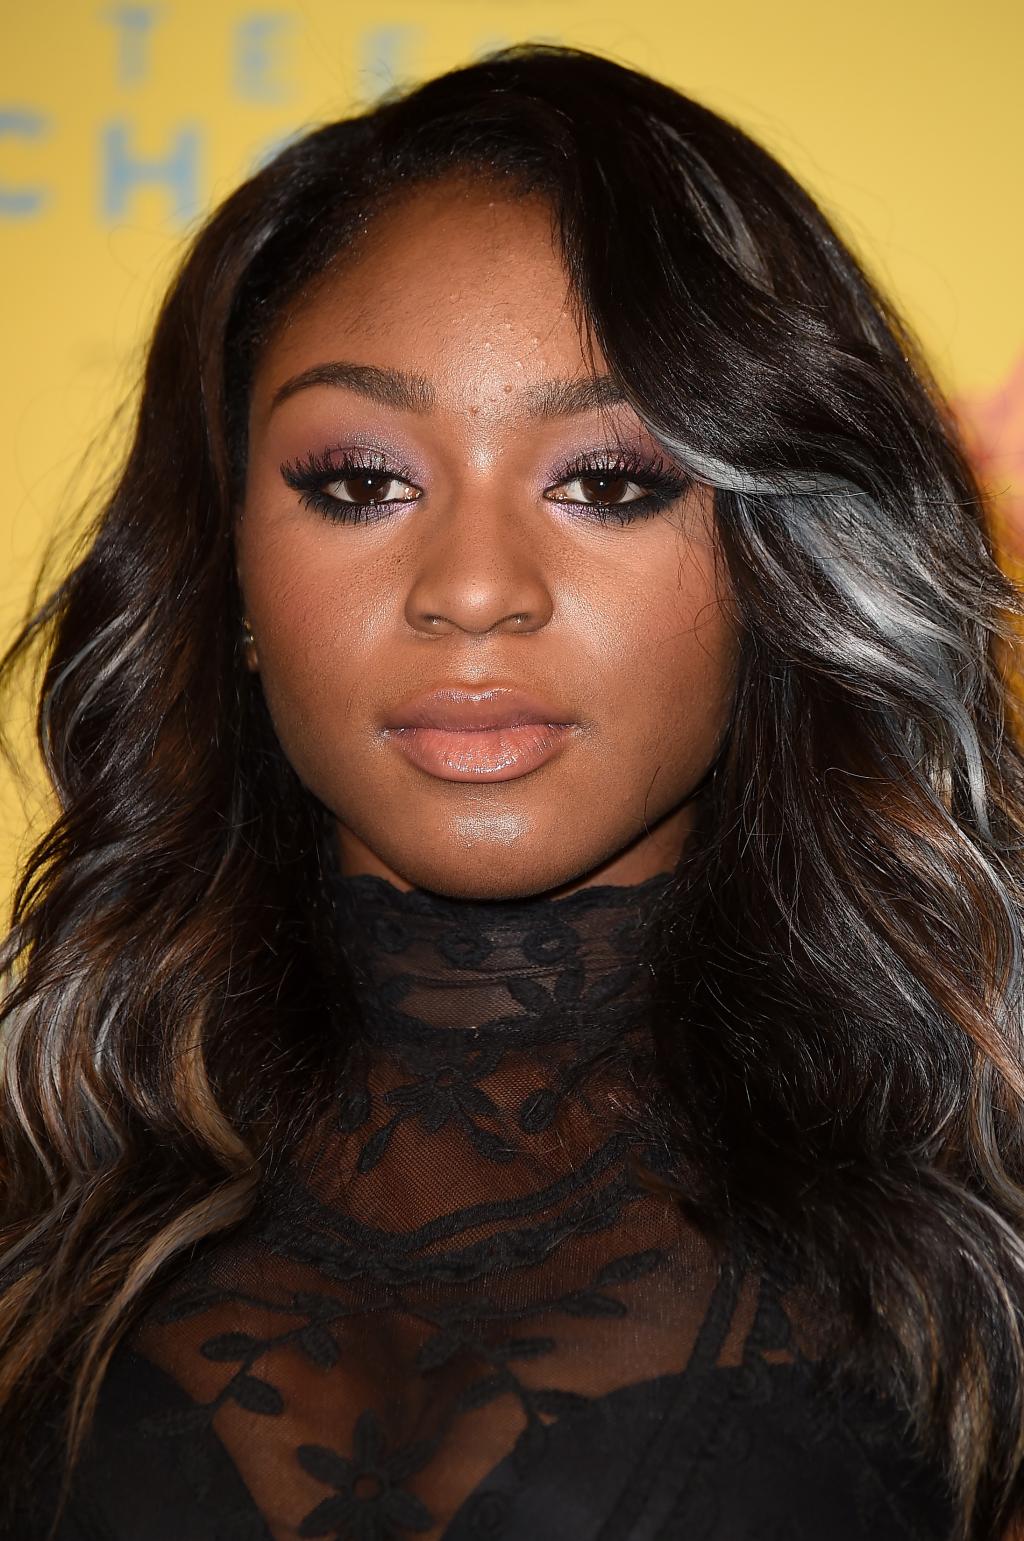 Normani Hamilton Shows Off A Short, Pixie Hairstyle At The MTV Video